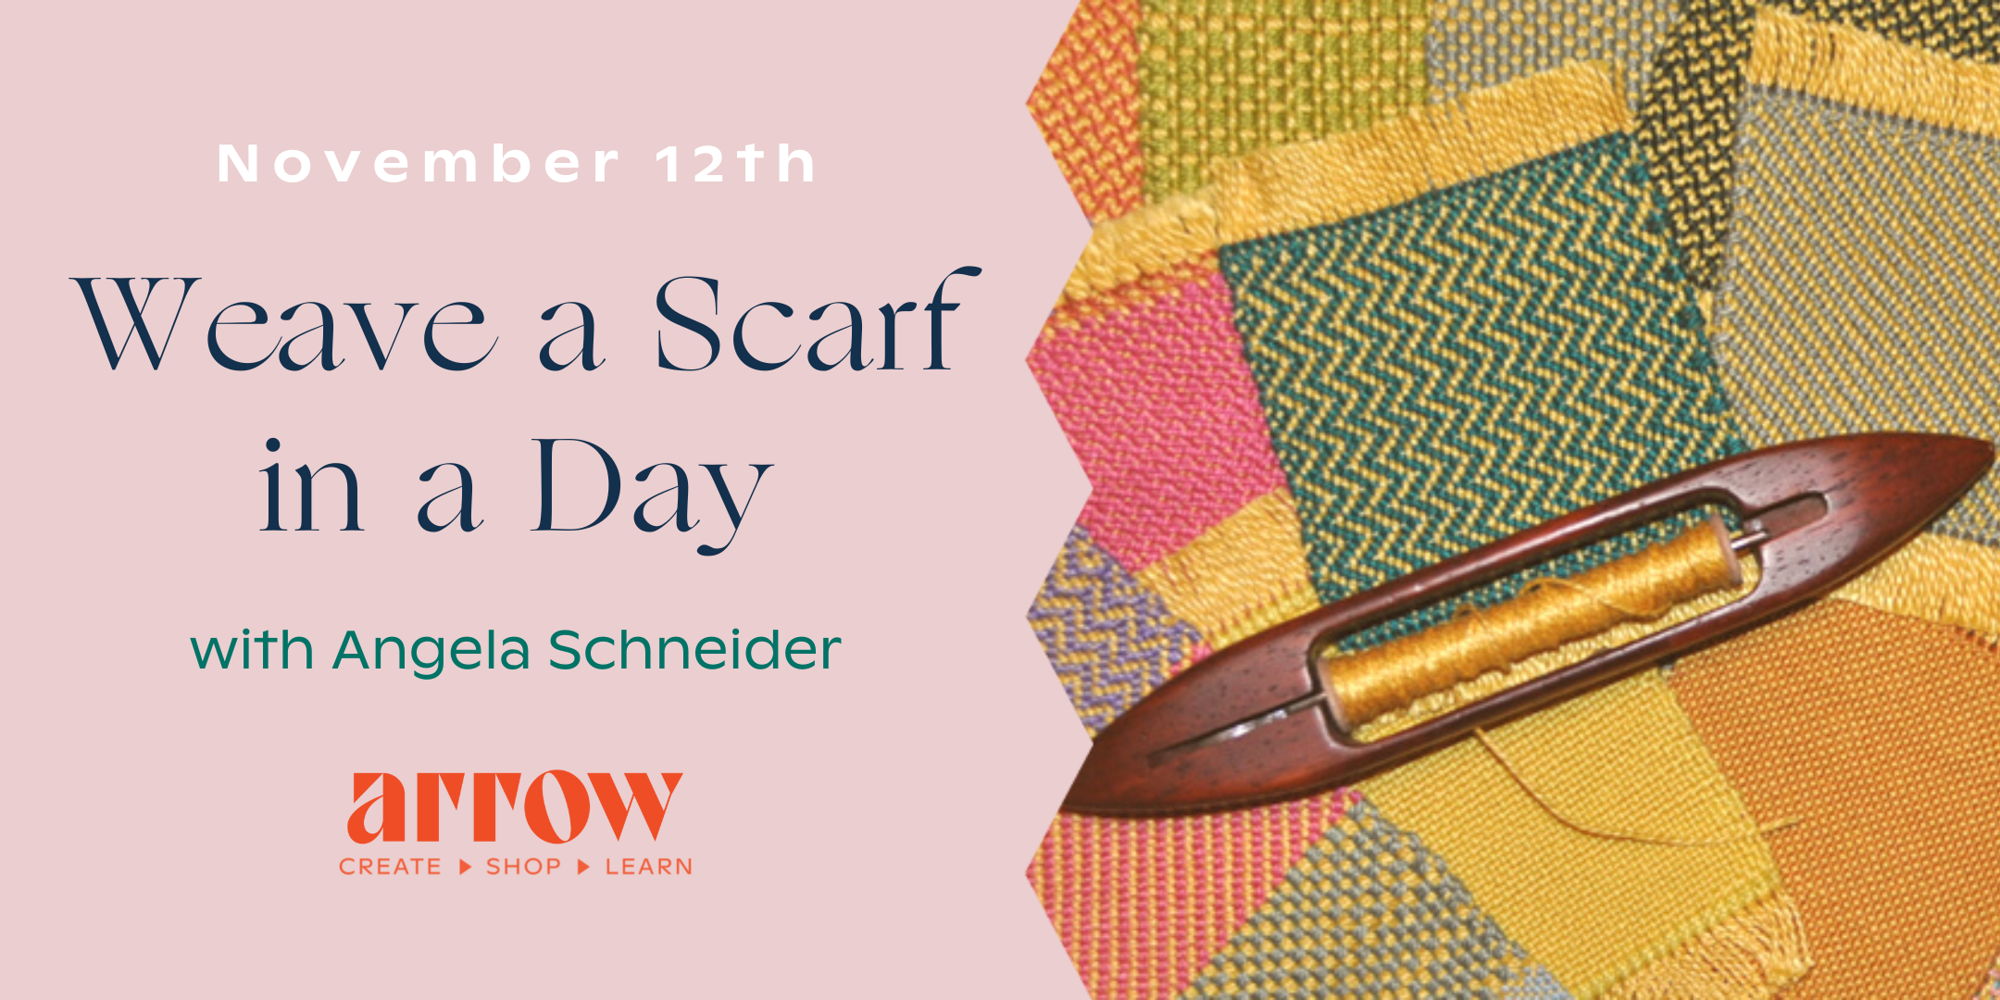 Weave a Scarf in a Day with Angela Schneider promotional image